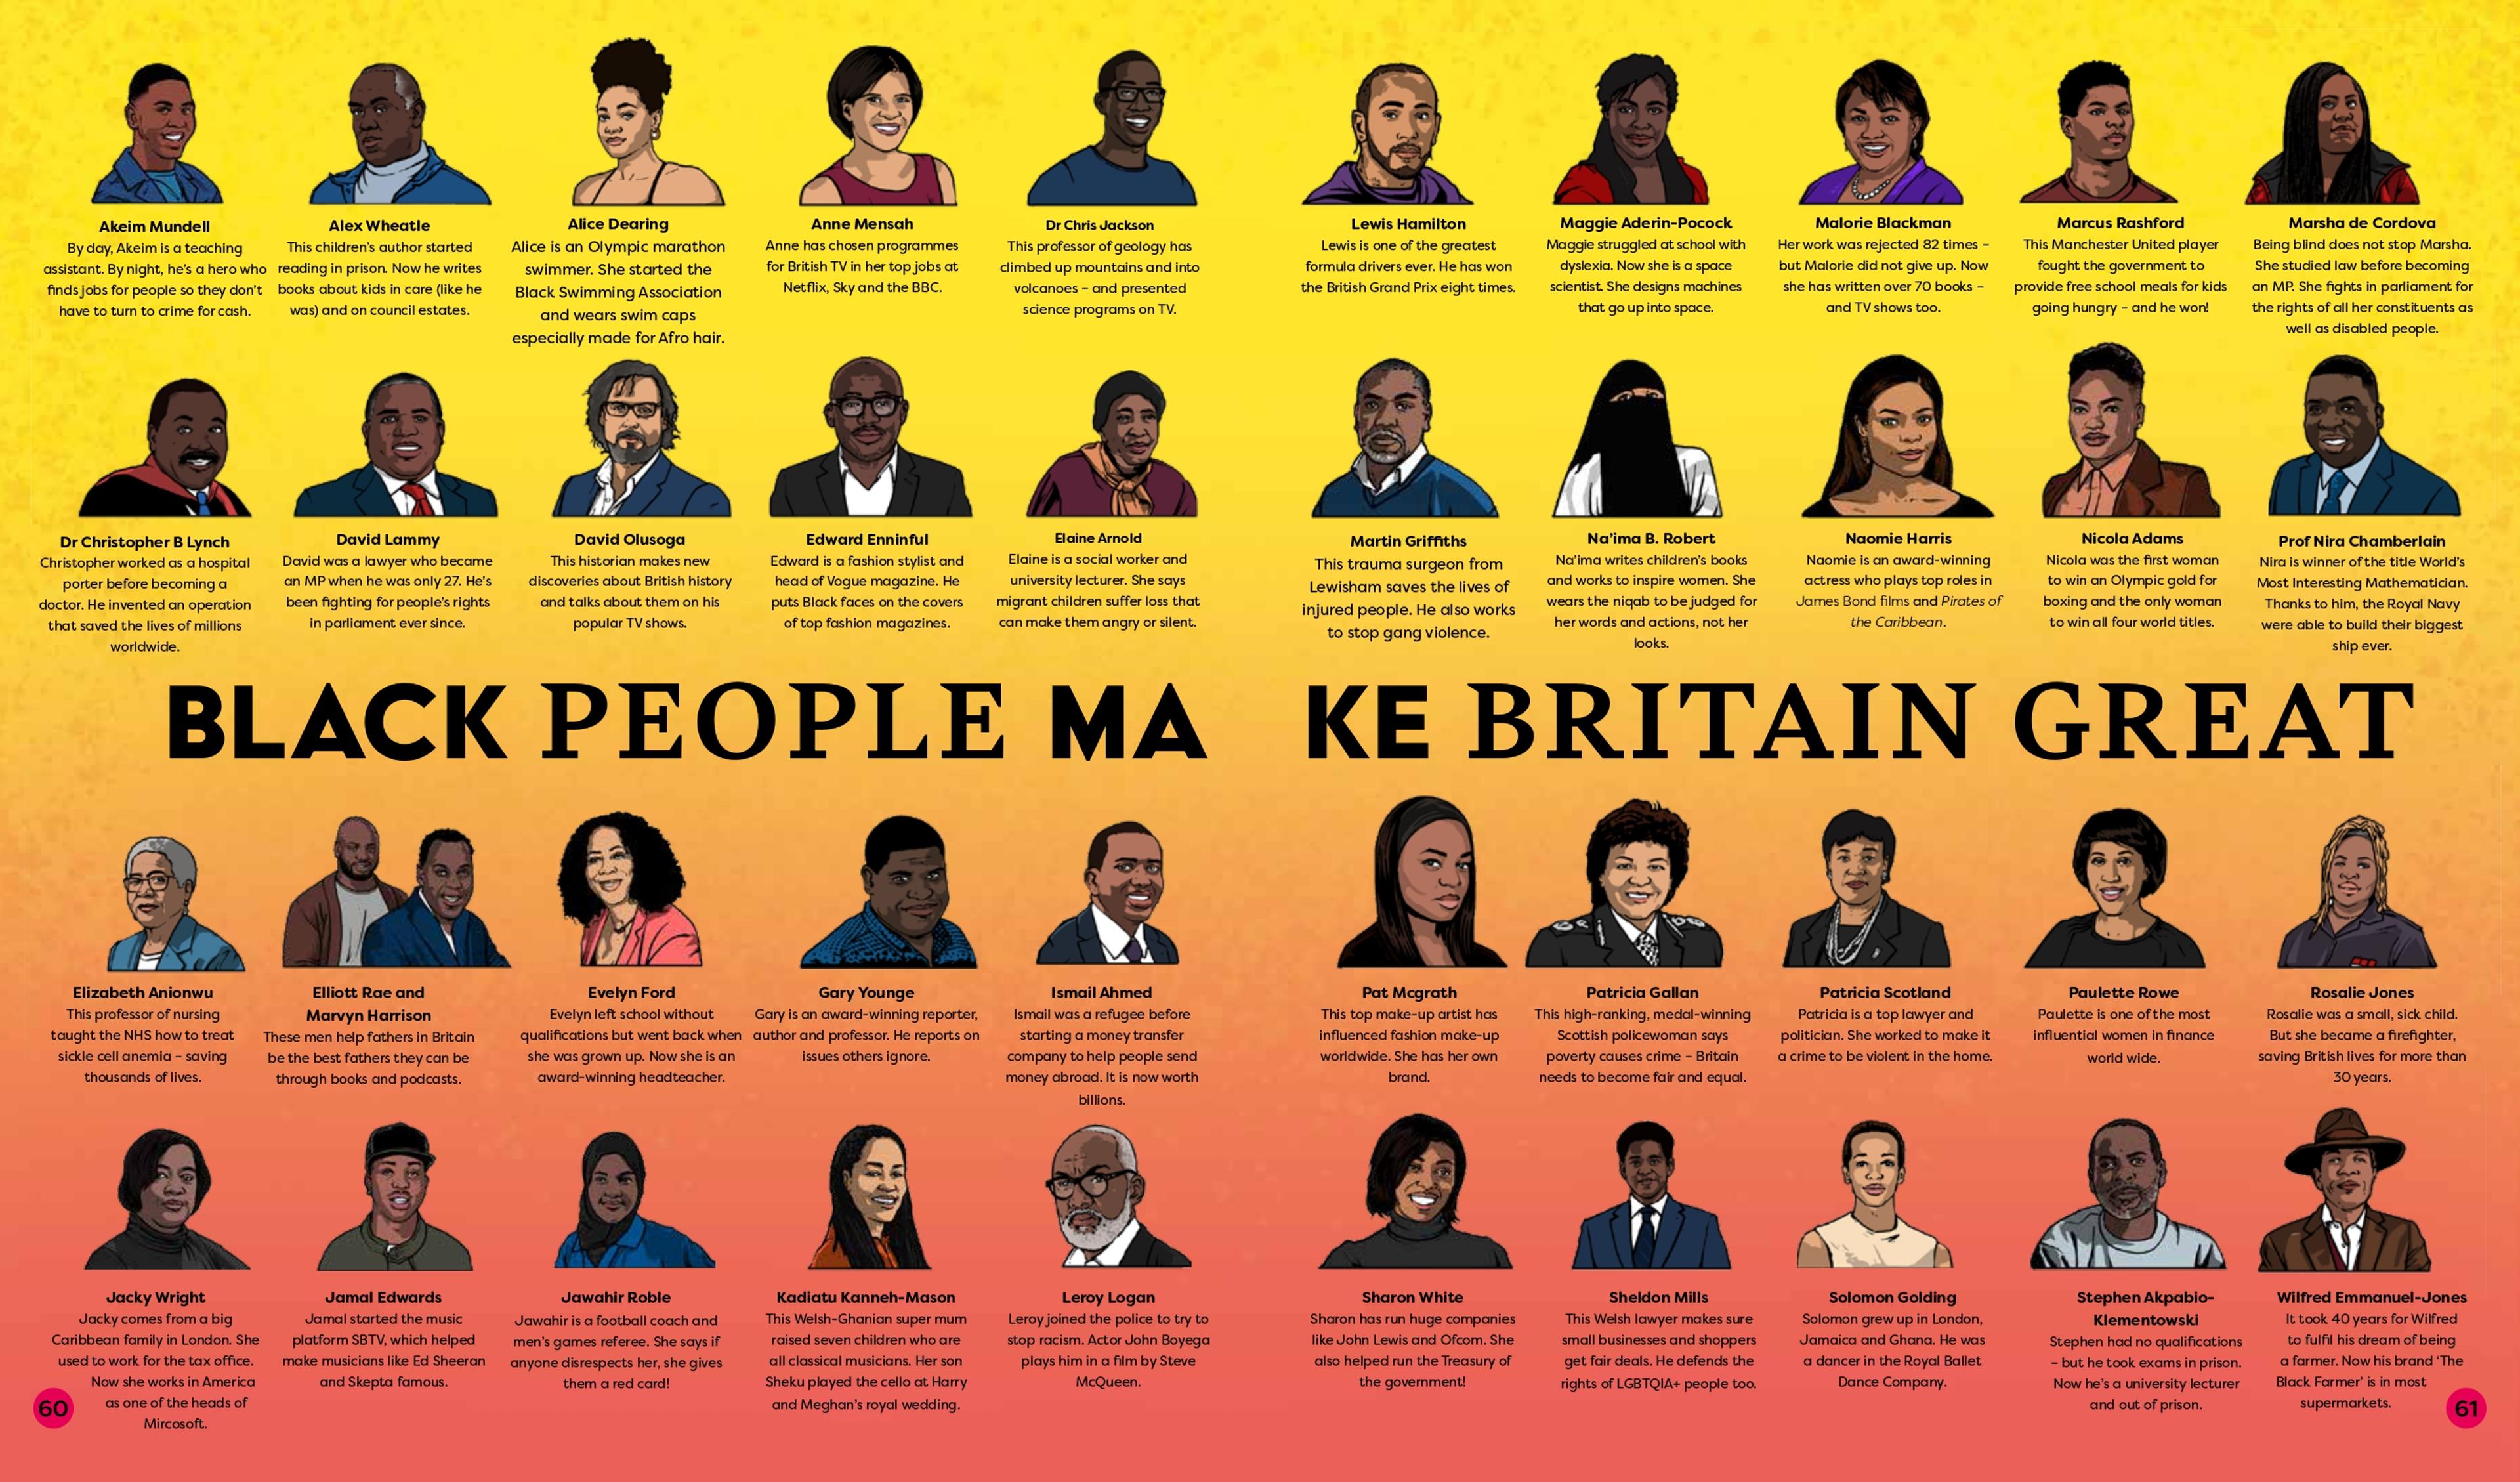 Spread featuring numerous busts of famous Black British people with short blurbs of text talking about their accomplishments